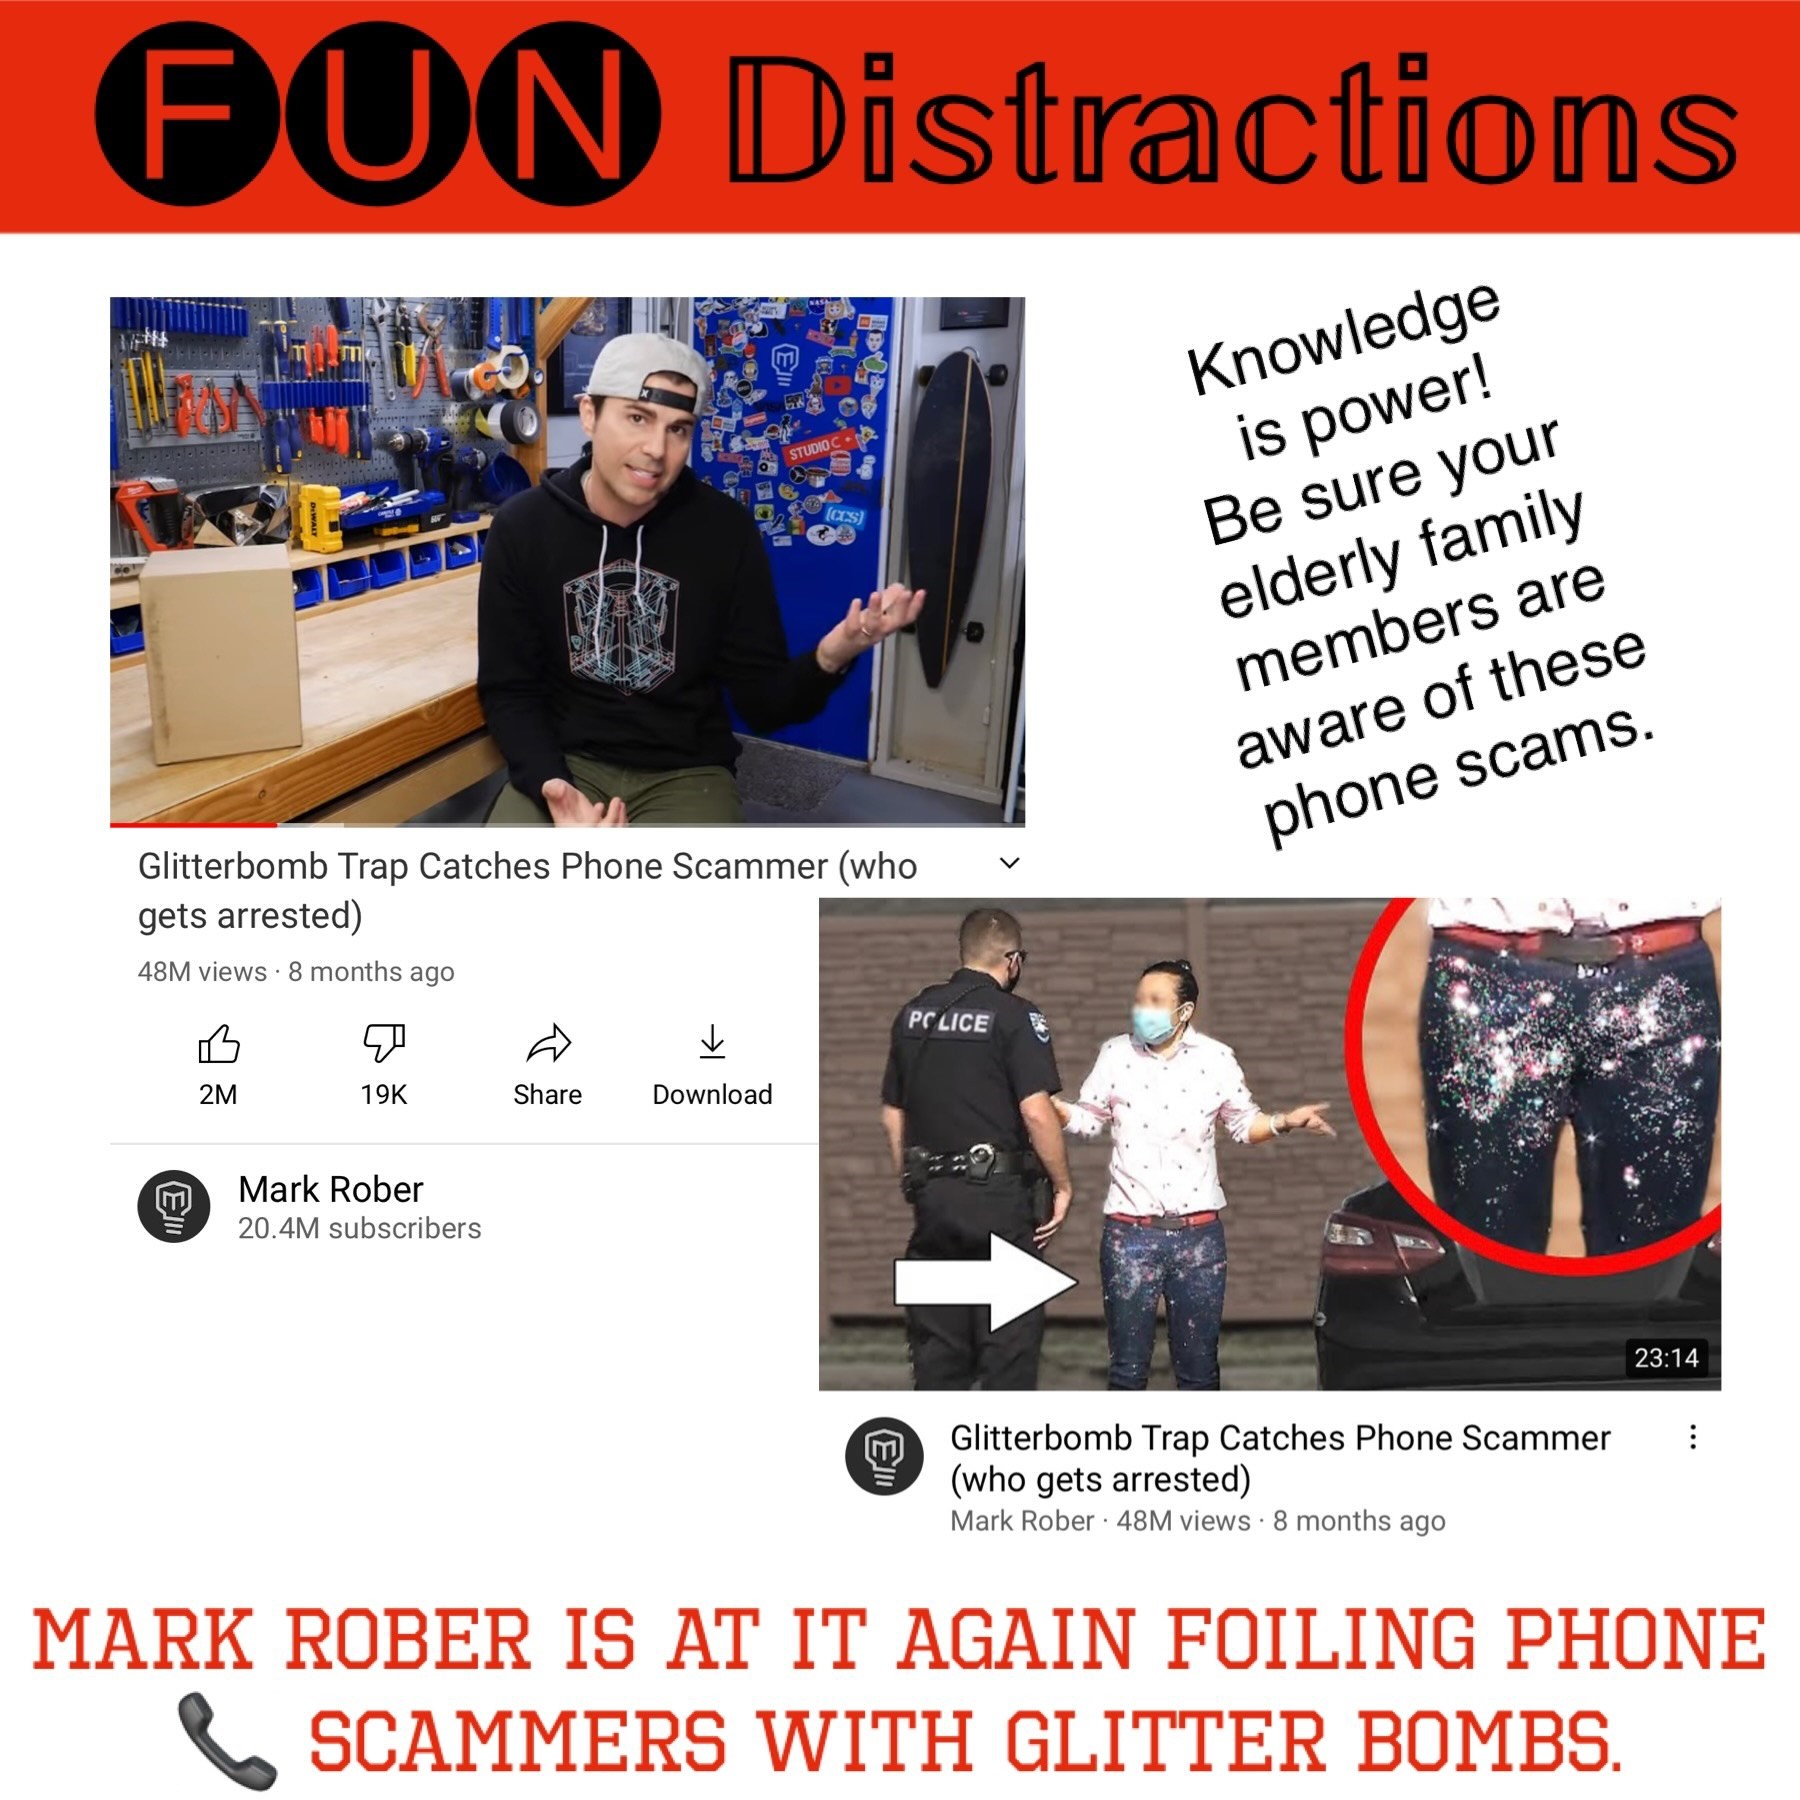 Image advertising the Library’s FUN Distractions series post about Mark Rober foiling phone scammers